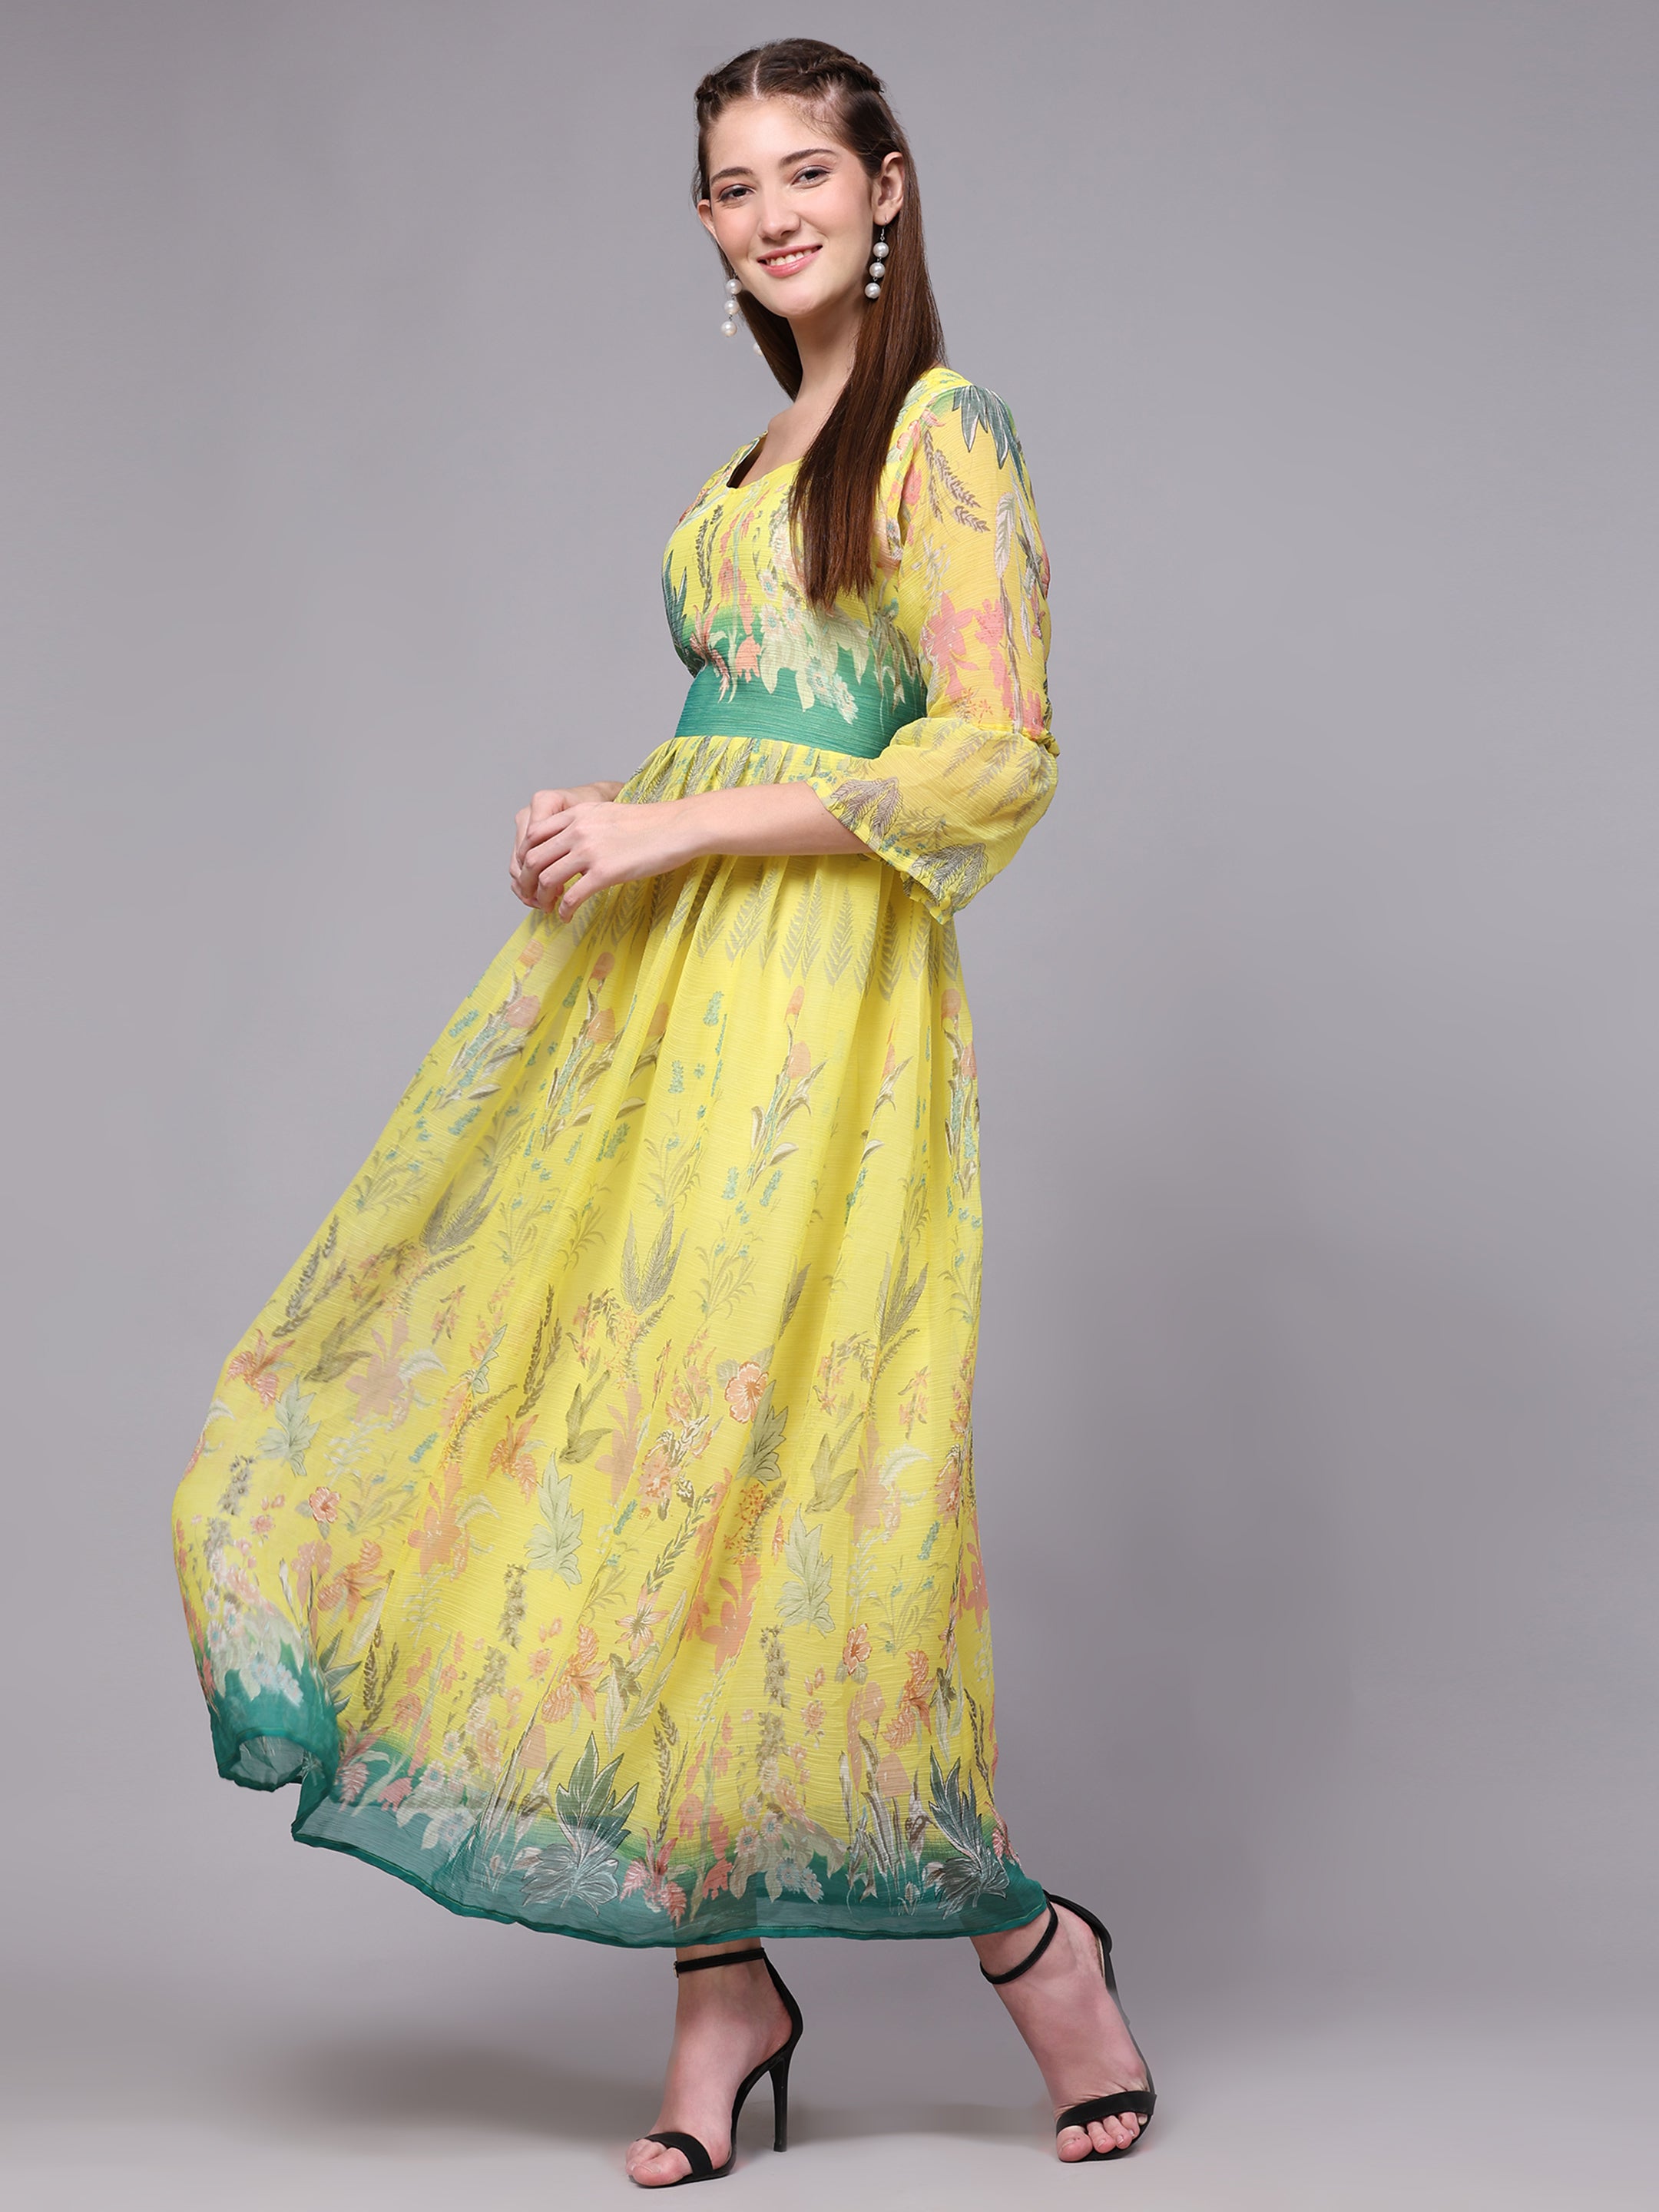 Blooming Elegance: Floral Printed Maxi Dress in Luxuriously Soft Chiffon